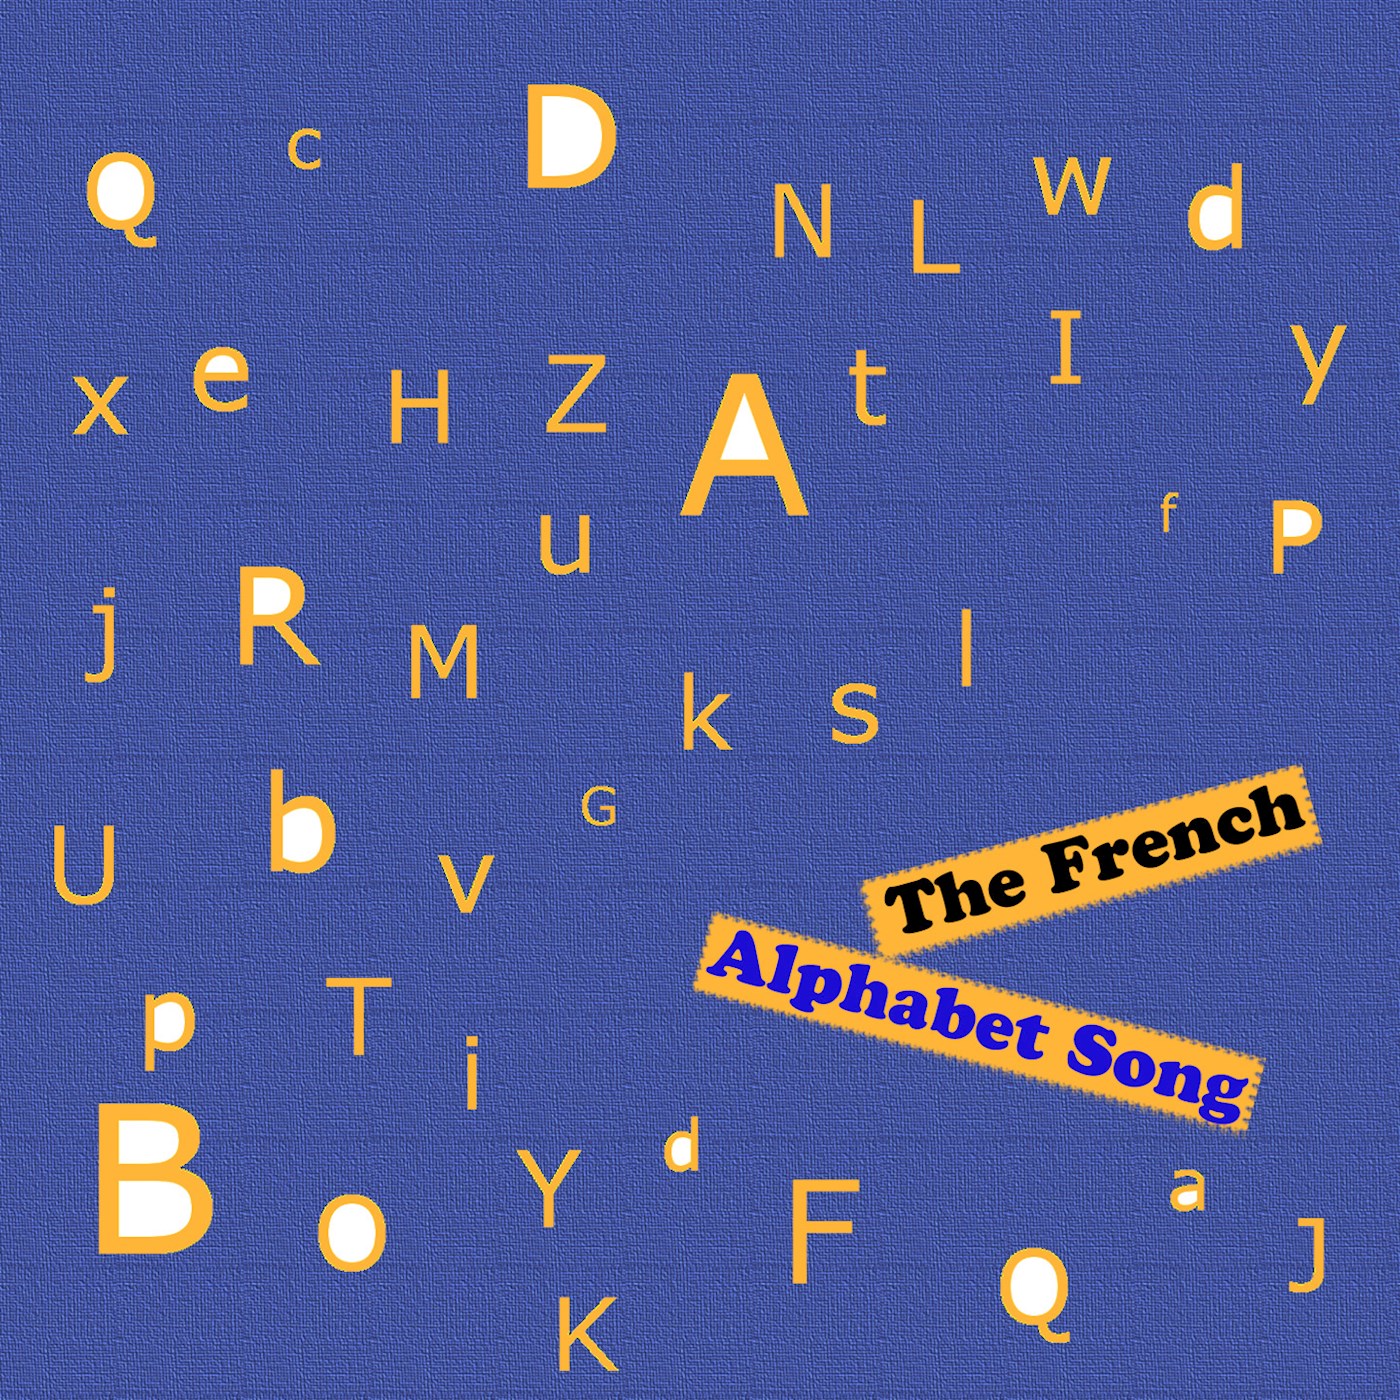 The French Alphabet Song